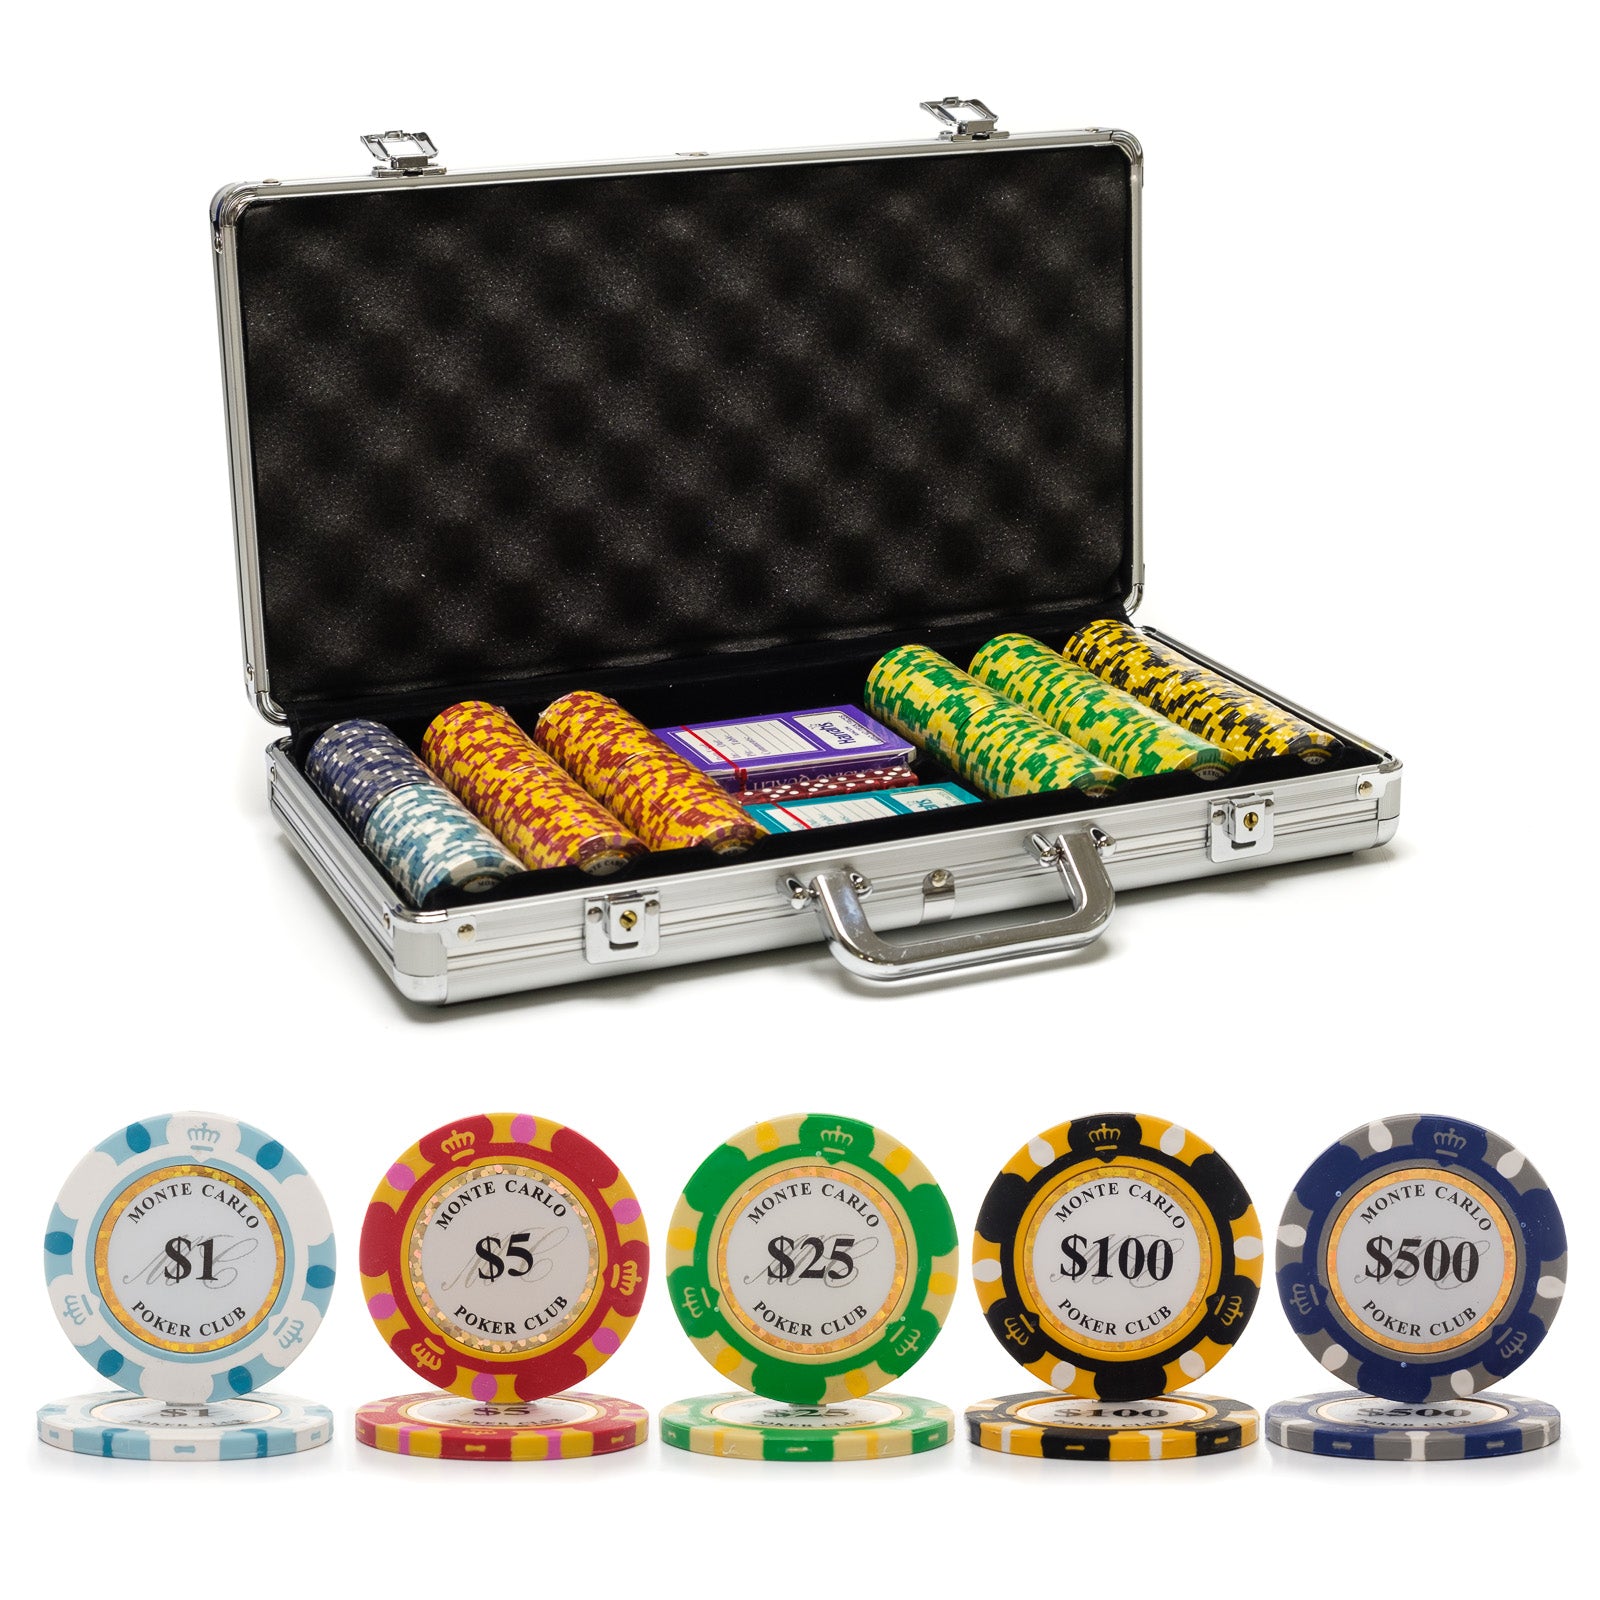 300 pc. 12.5g Monte Carlo Poker Chip Set with Aluminum Case